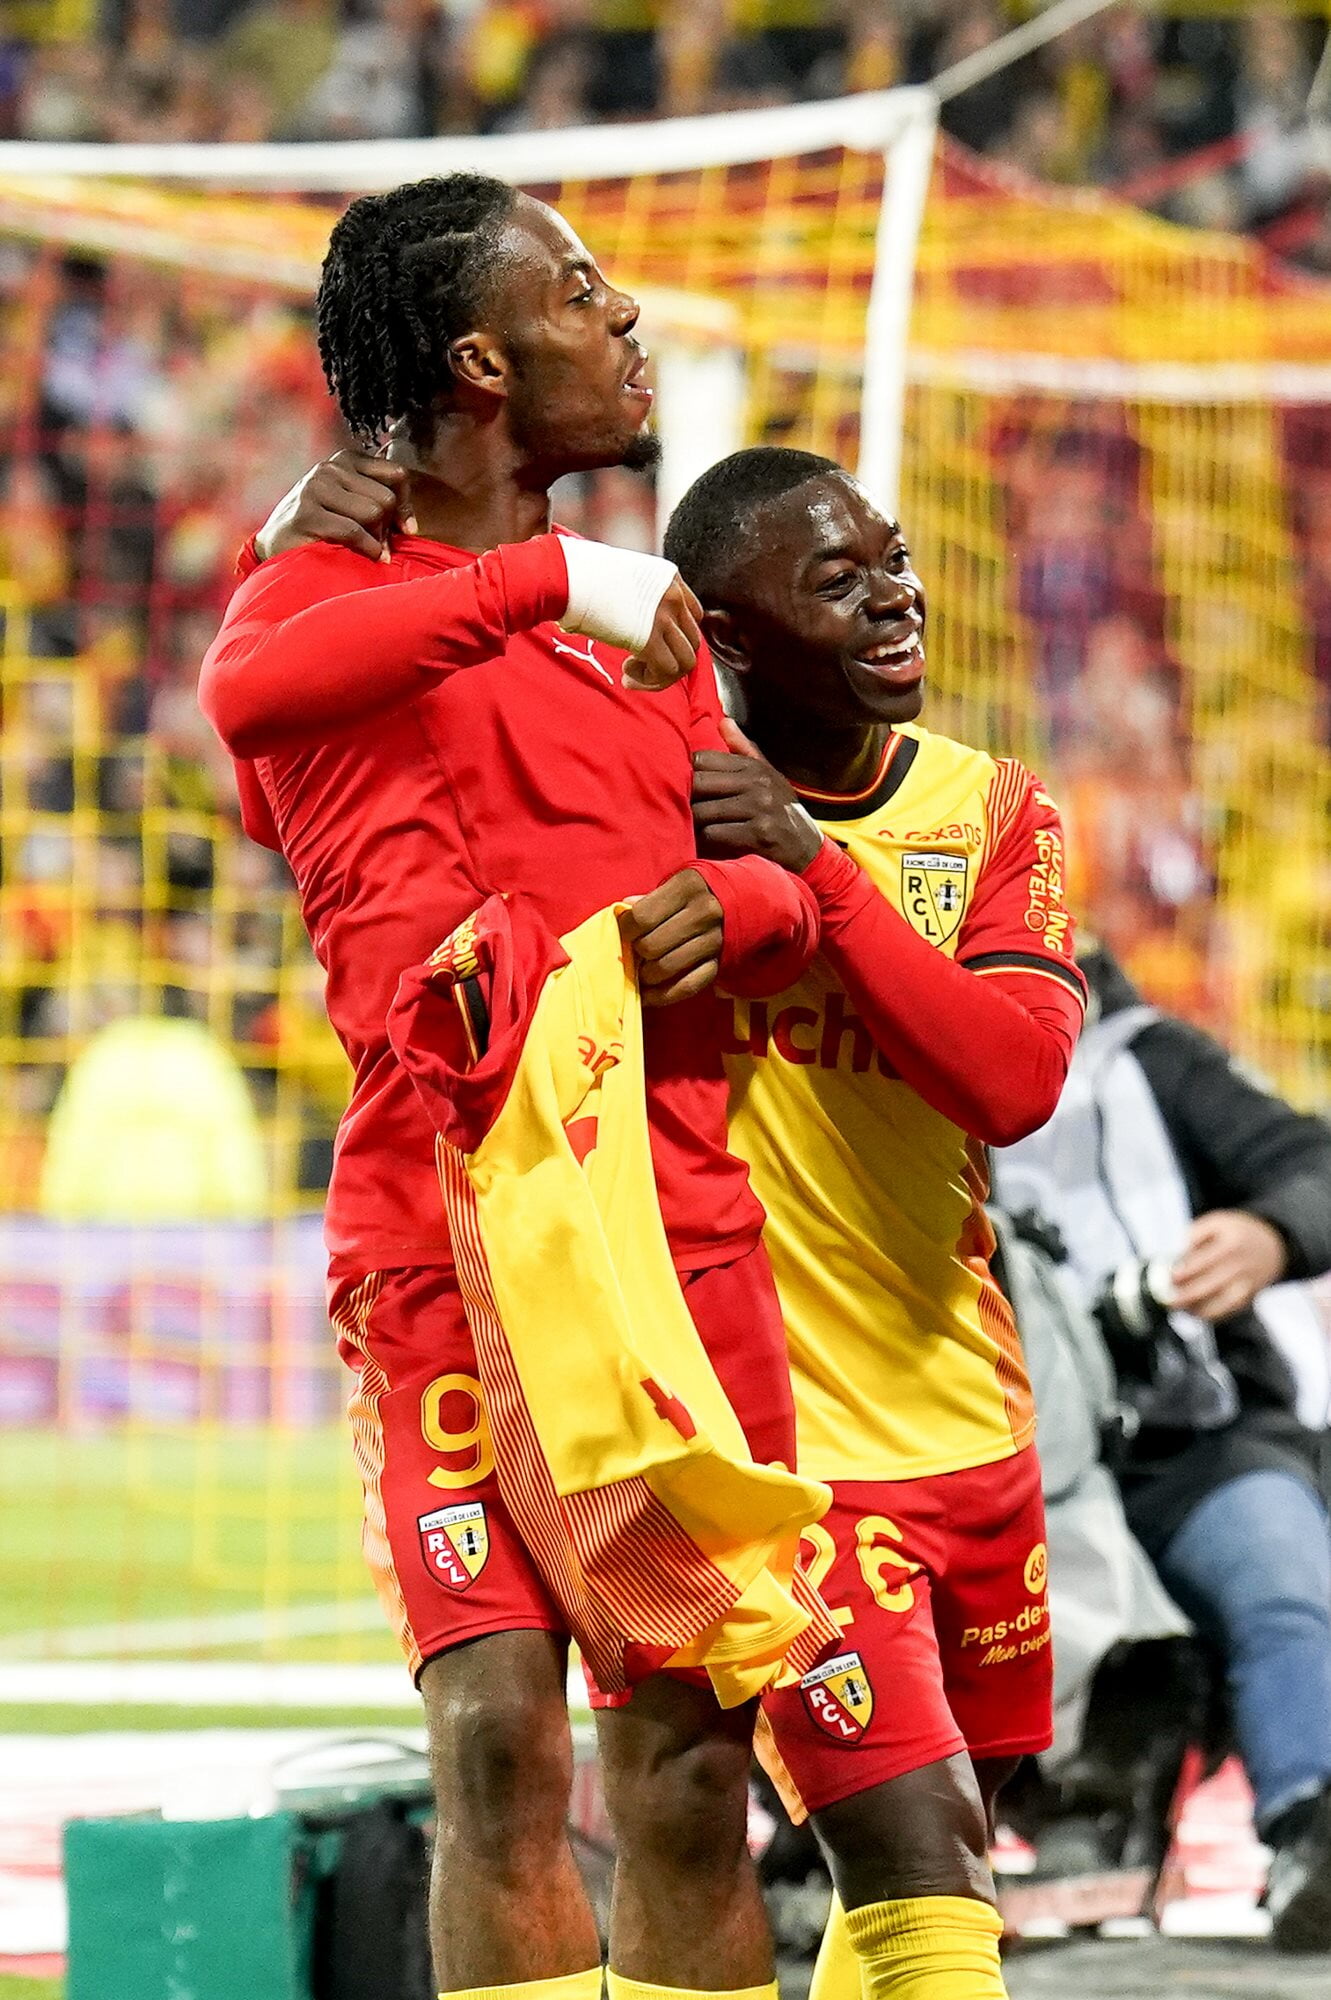 RC Lens' Elye Wahi and Nampalys Mendy celebrate the striker's goal against FC Lorient